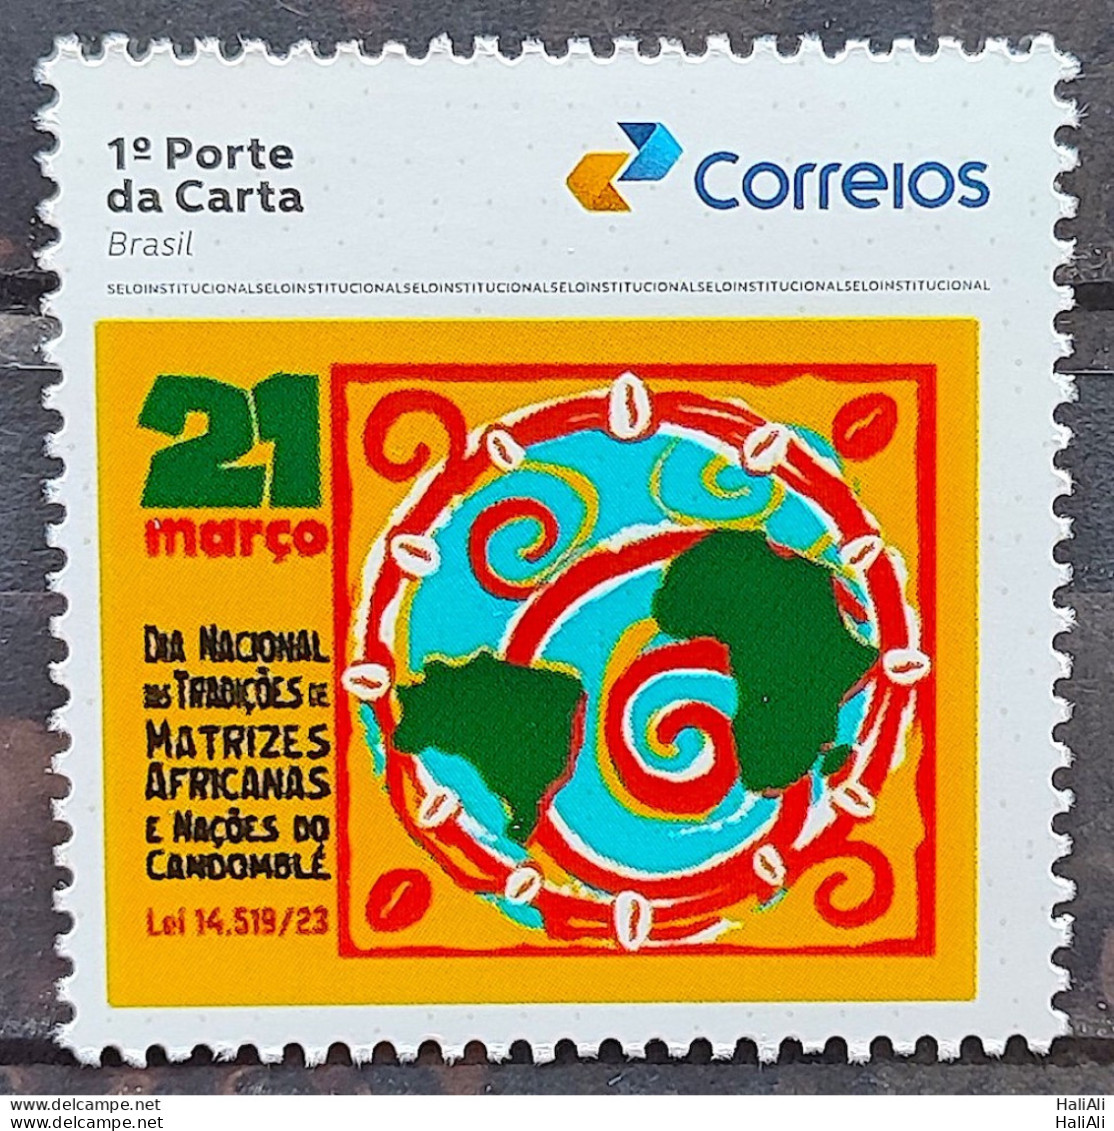 SI 06 Brazil Institutional Stamp Traditions Of African Matrices And Candomble Nations Map 2023 - Personalisiert